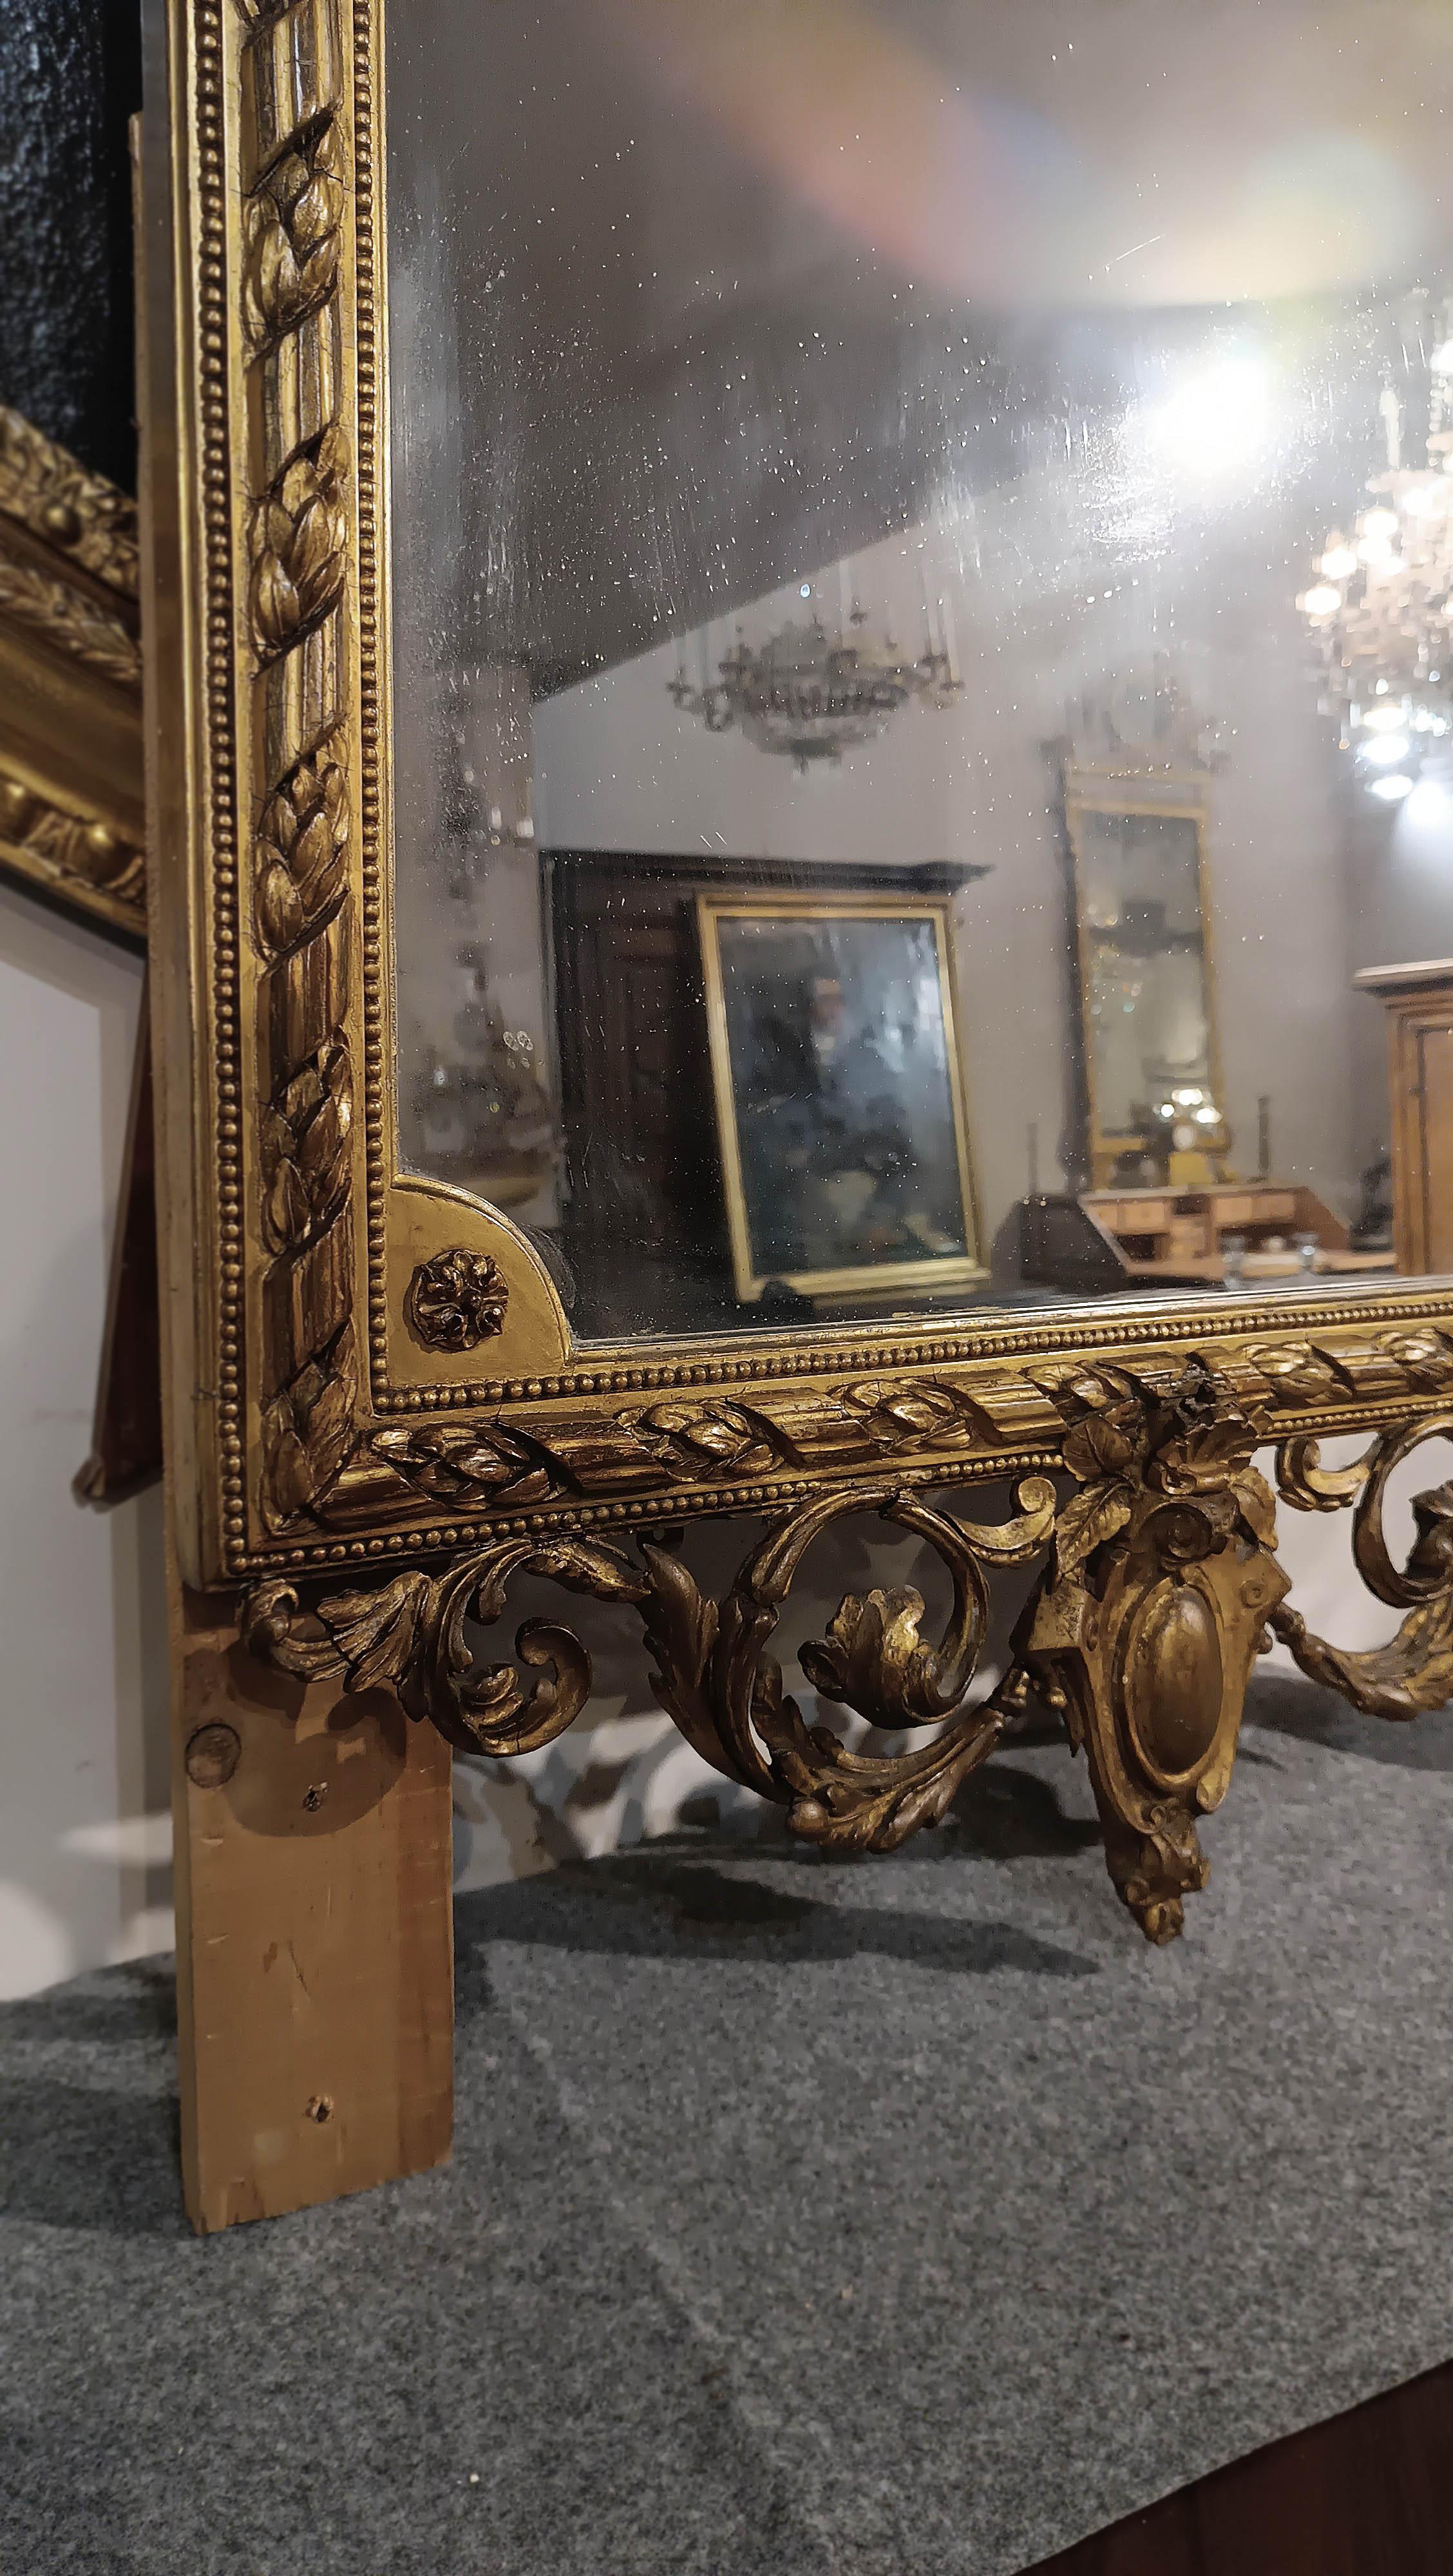 END OF THE 18th CENTURY GOLDEN MIRROR WITH CARYATIDS For Sale 4